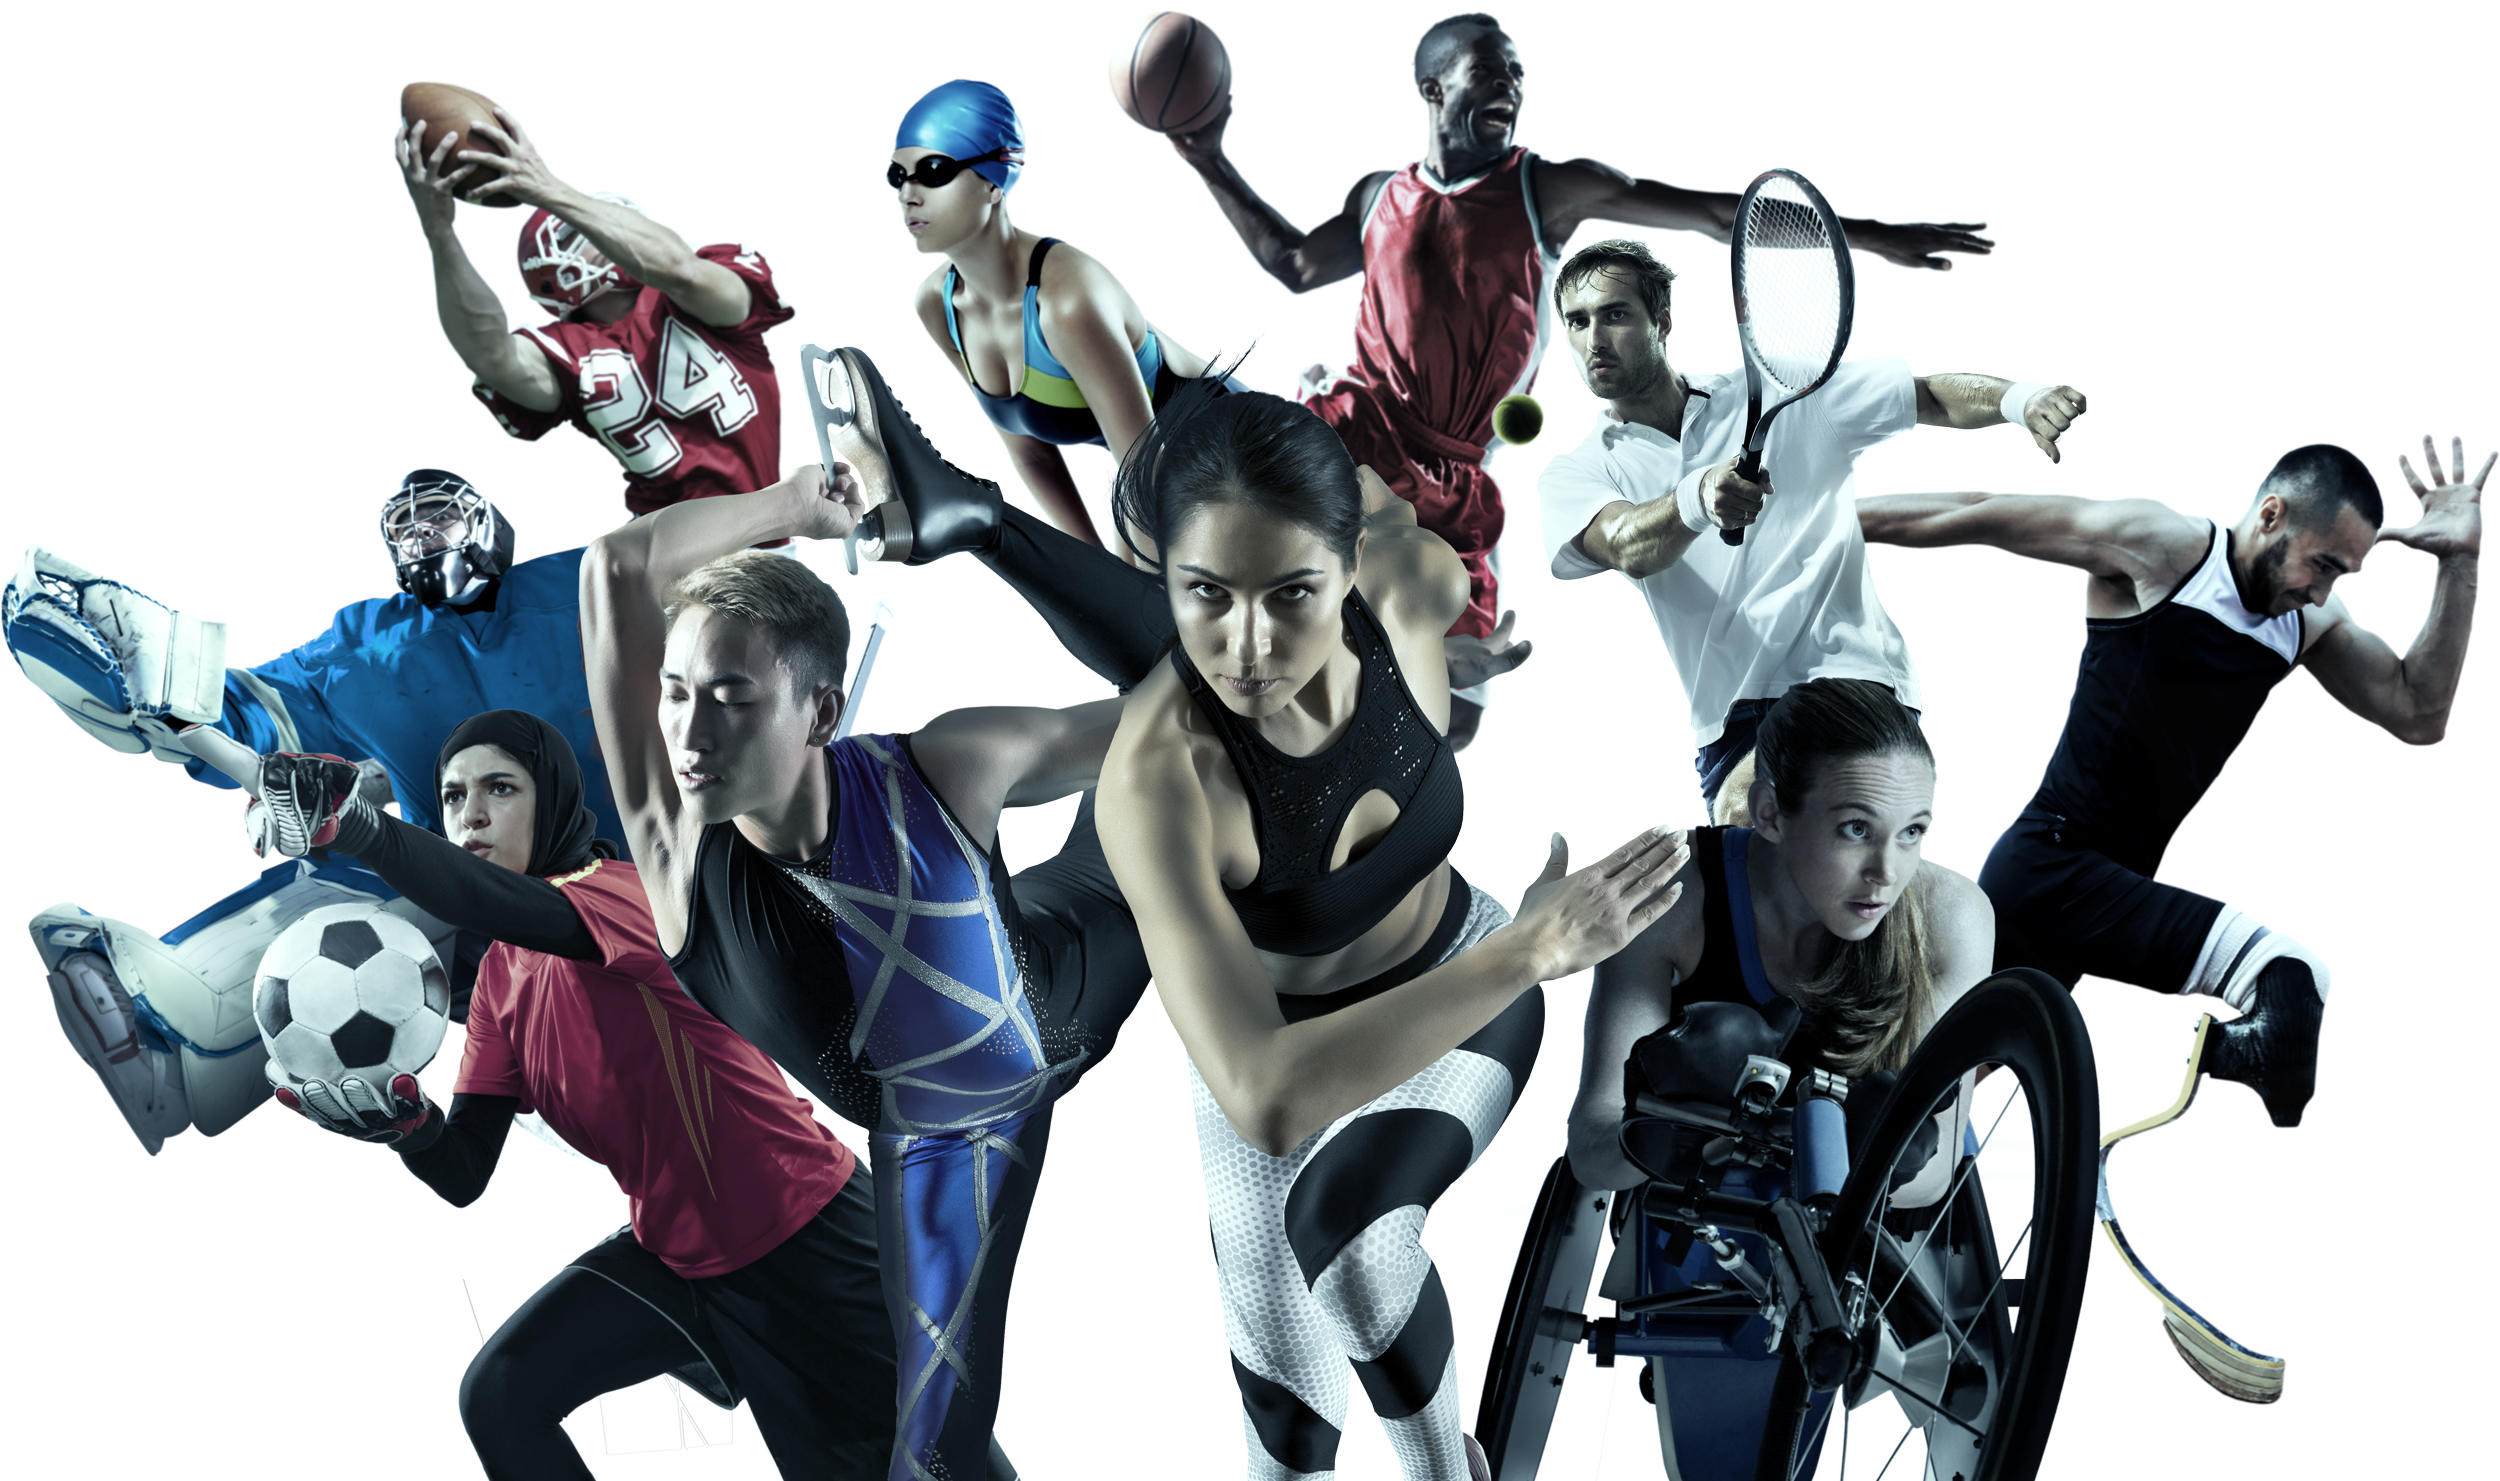 A collage of athletes from different sports: a hijabi soccer goalie, East Asian masc figure skater, masc American football and ice hockey players, at centre are white femme runner and wheelchair athletes, white masc tennis player, and and amputee sprinter wearing blade prostheses, and Black masc basketball player.